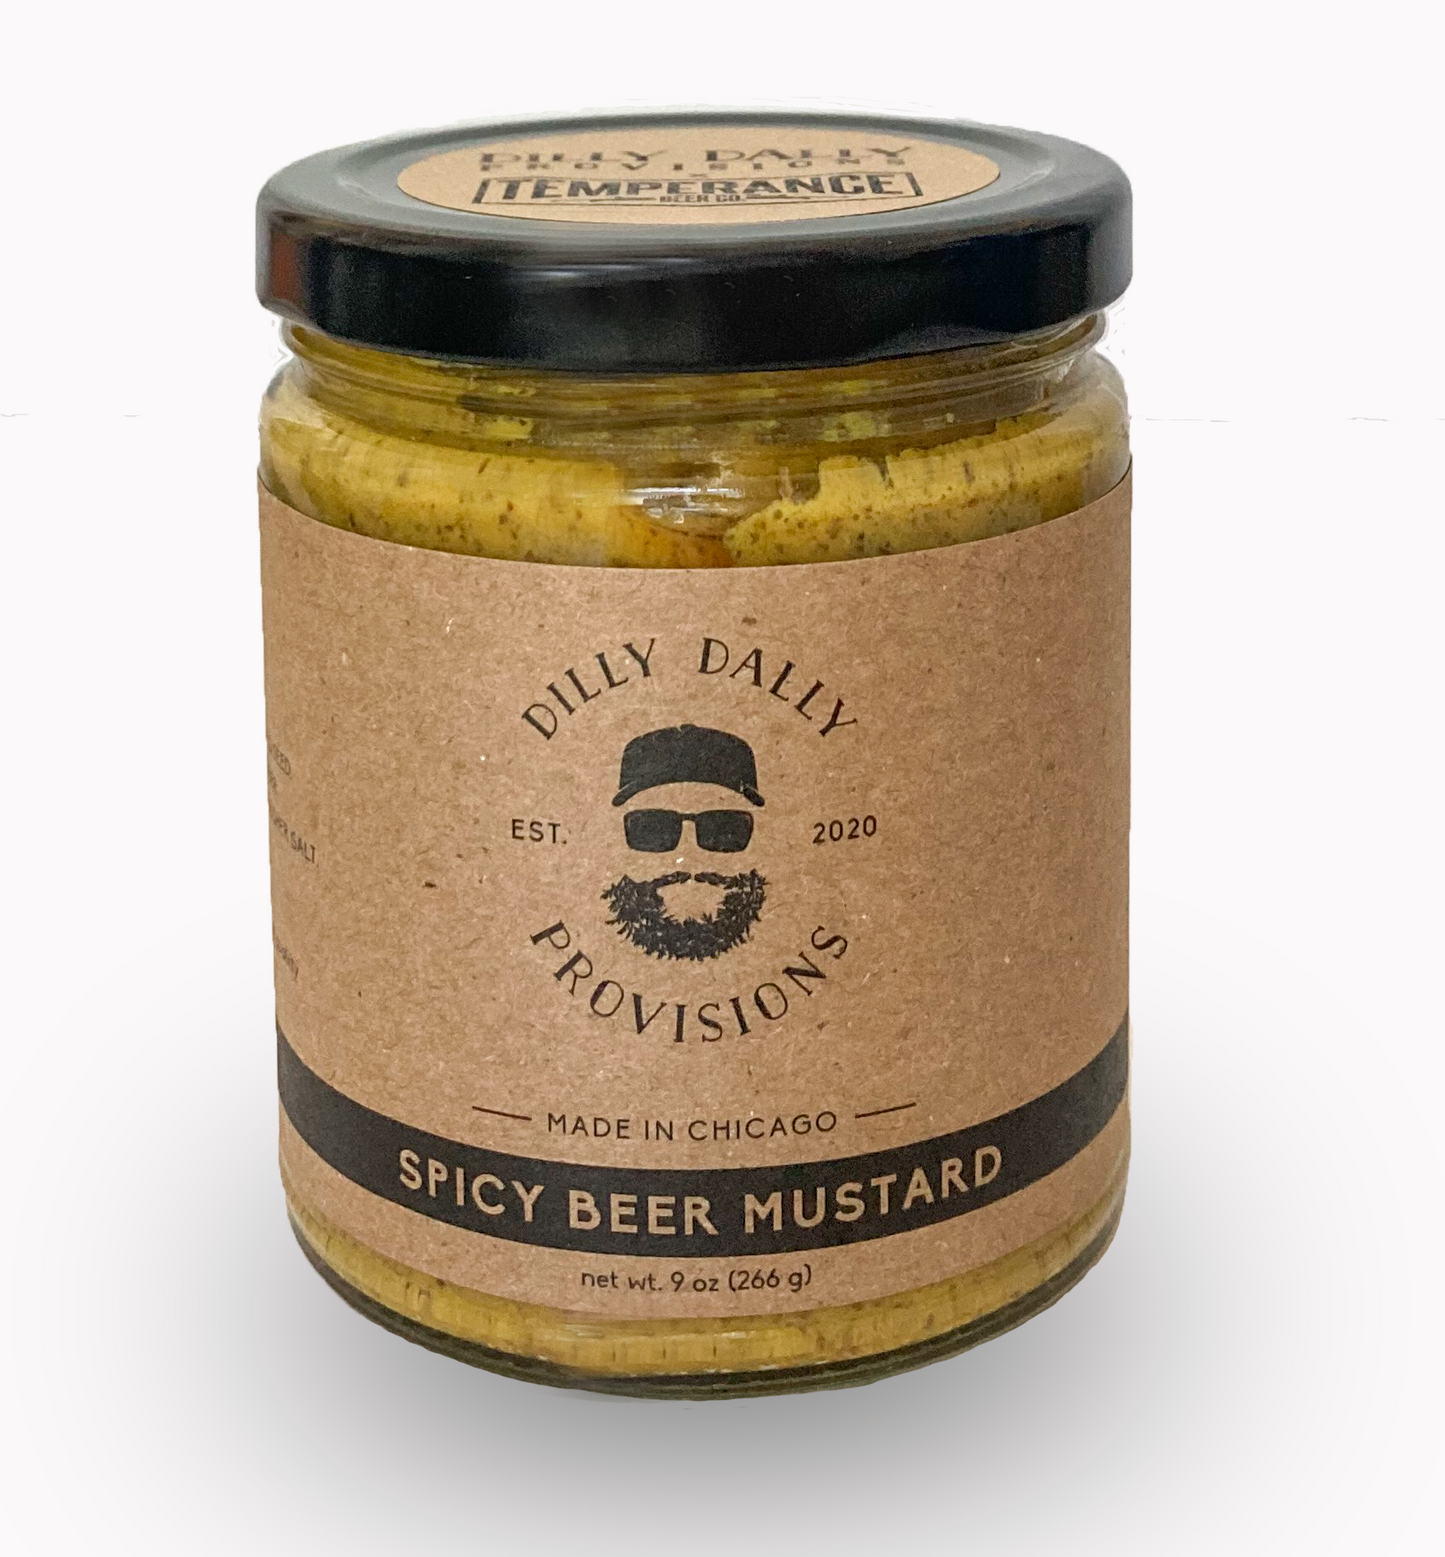 Dilly Dally Provisions Spicy Beer Mustard